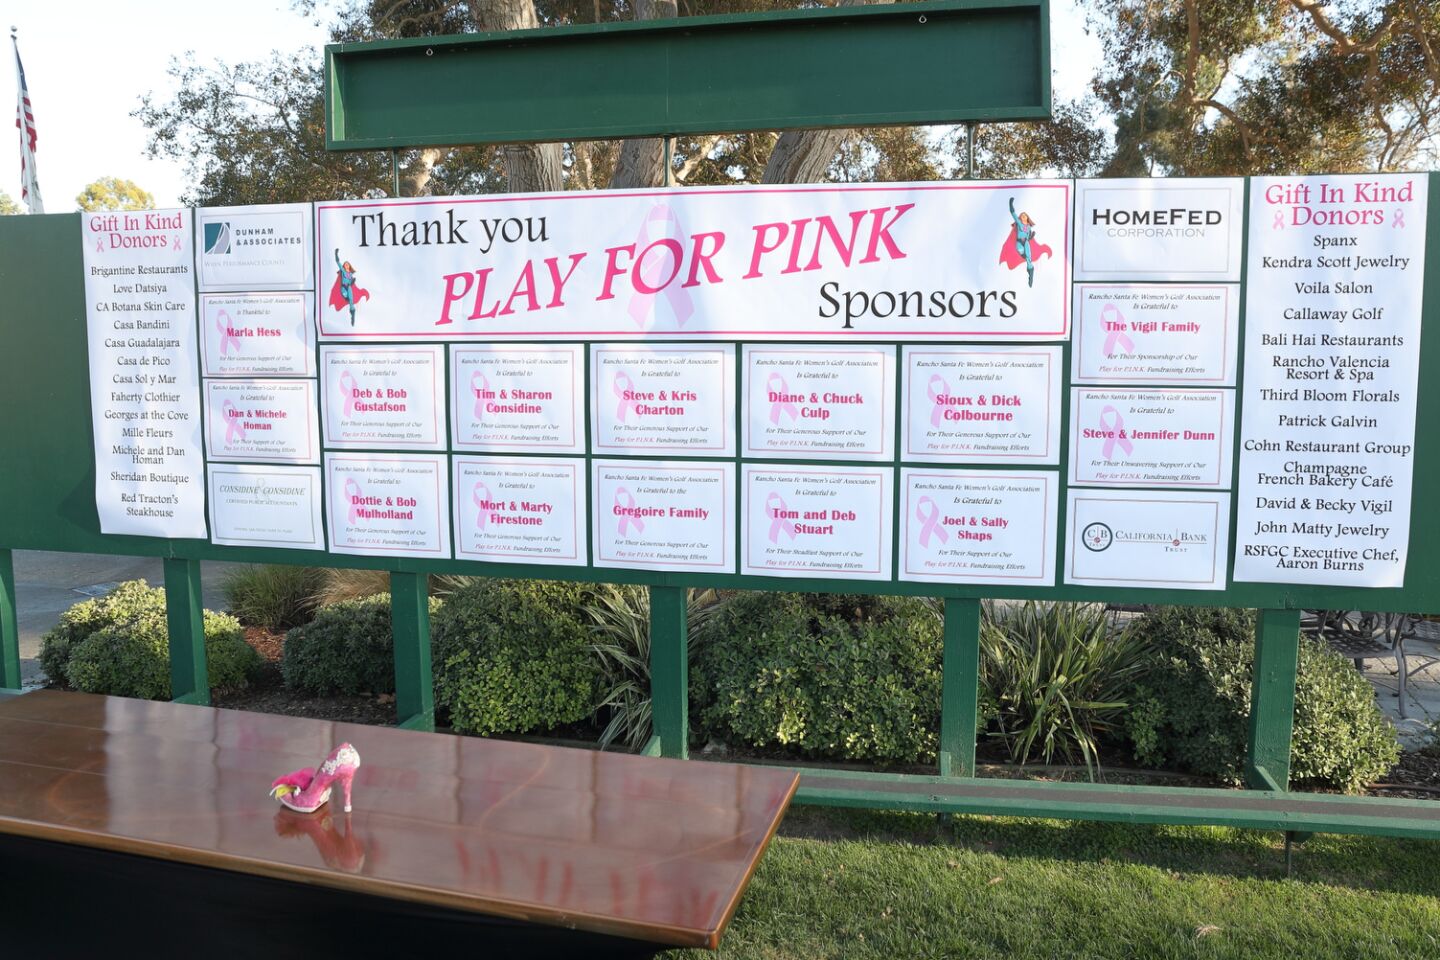 Play for Pink sponsors